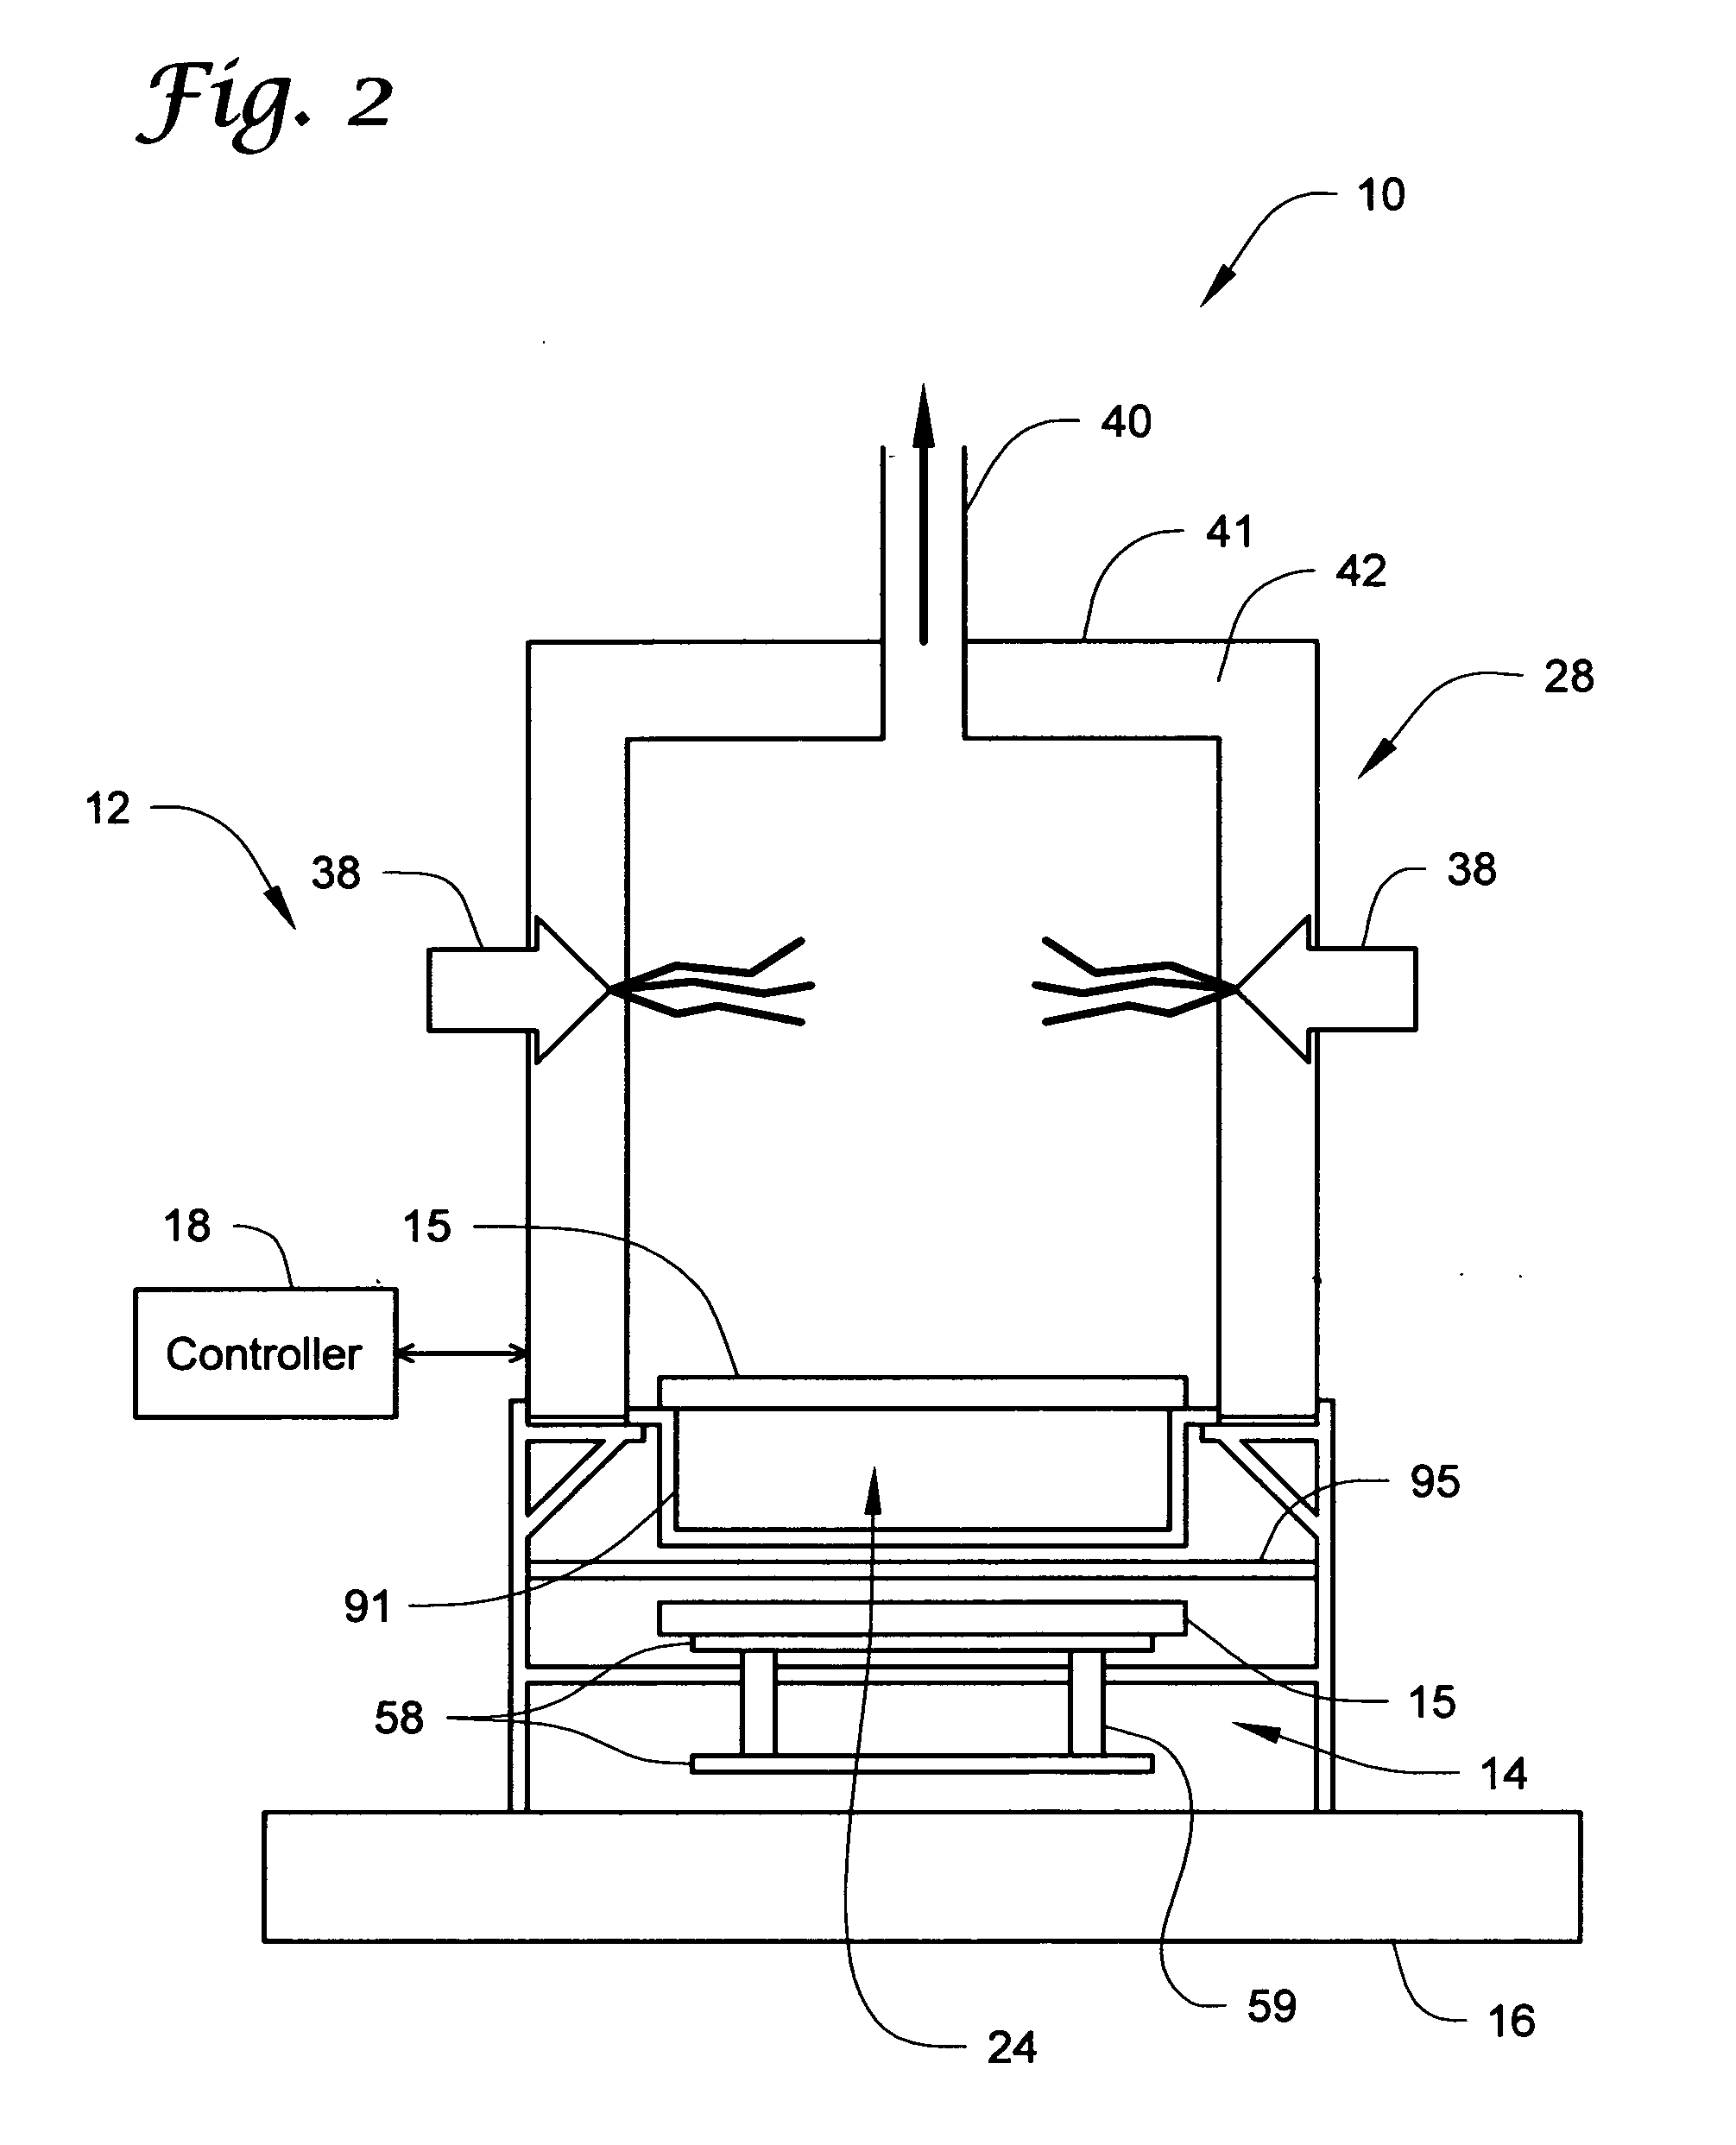 Linear hearth furnace system and methods regarding same